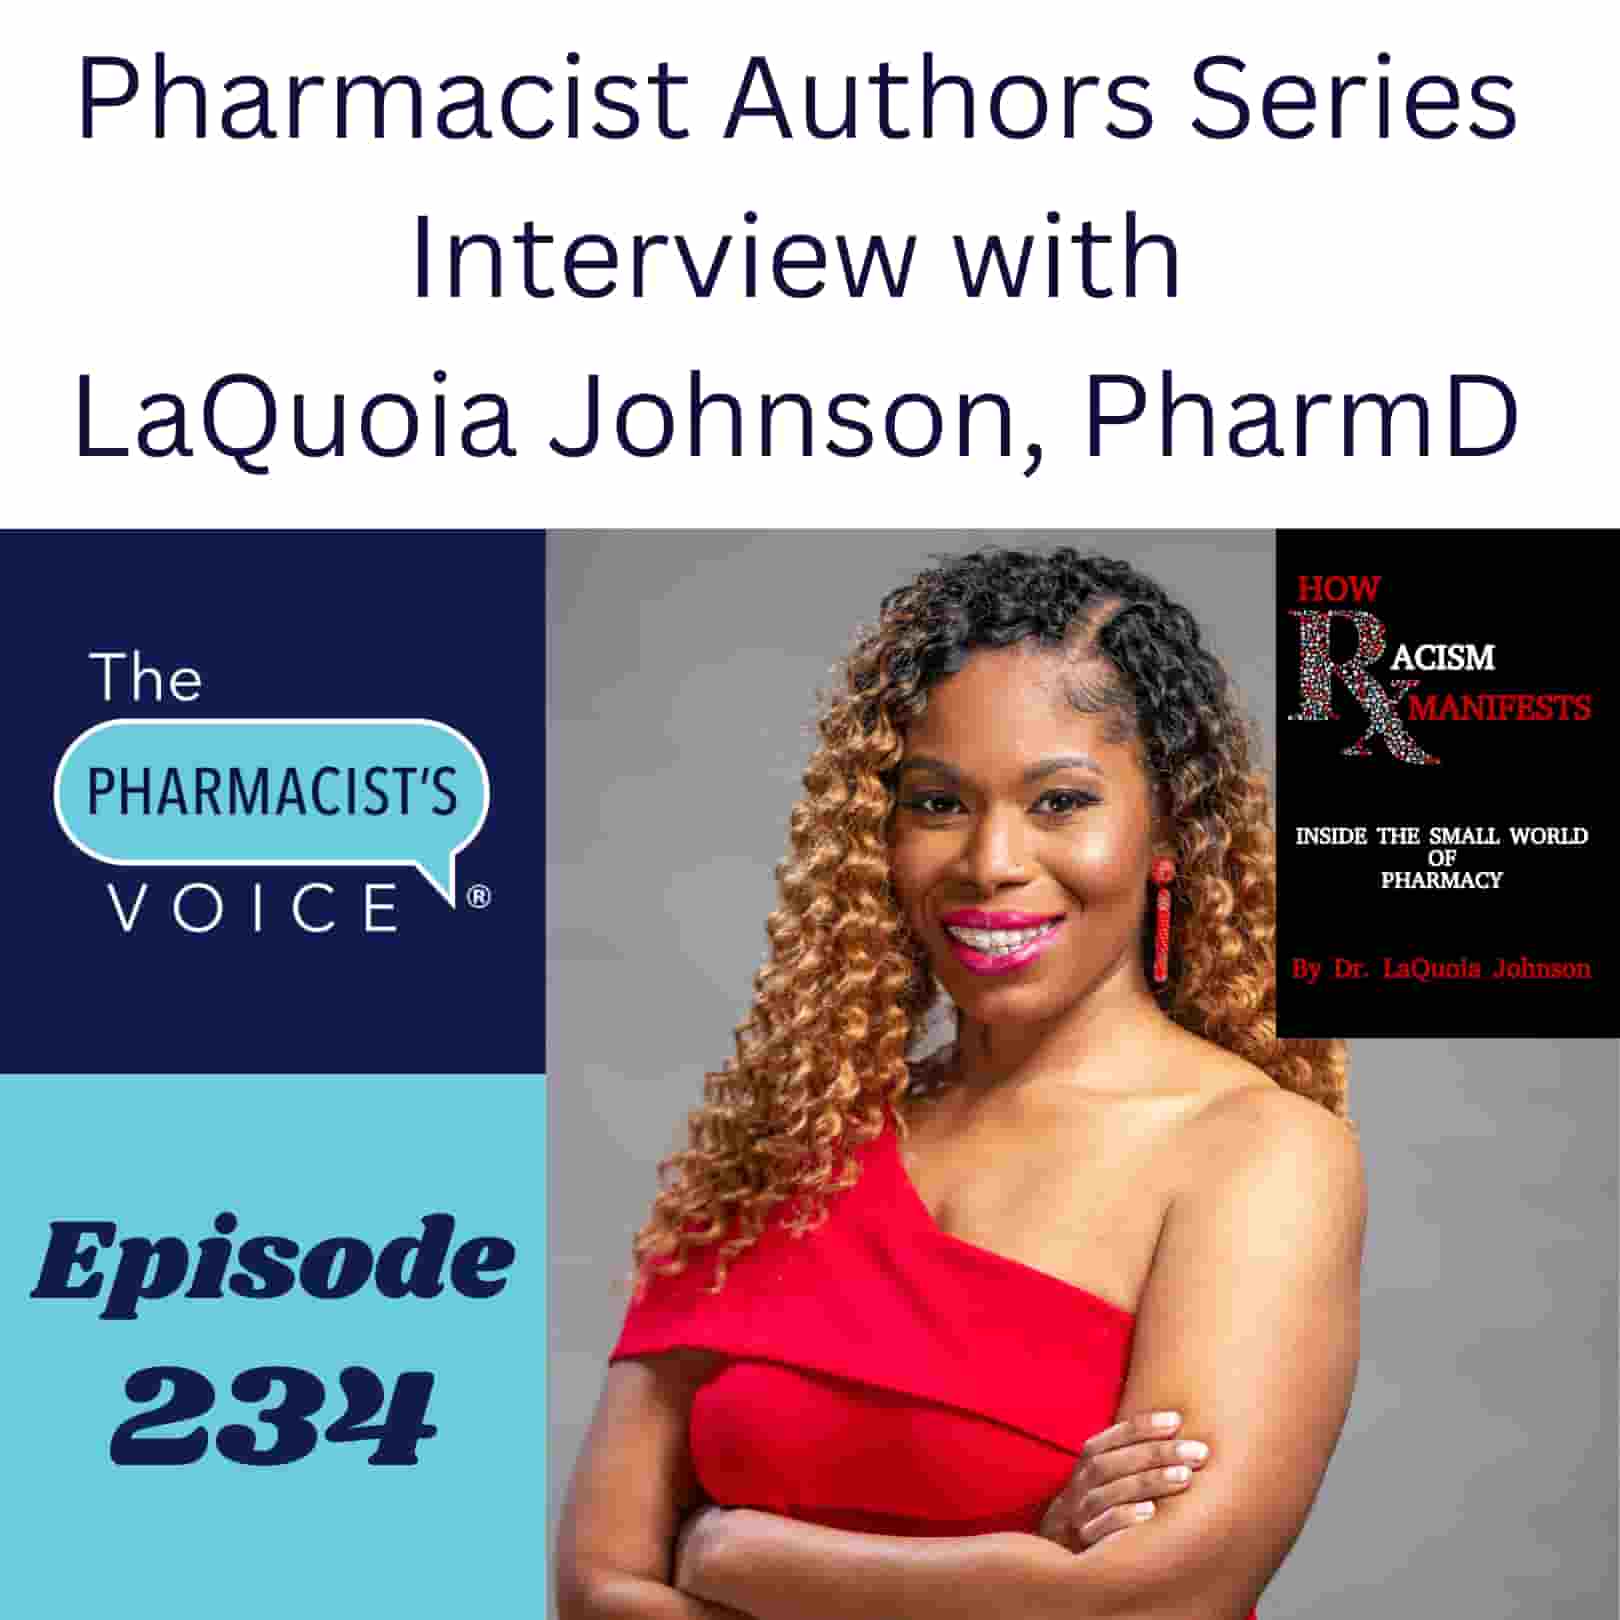 Pharmacist Authors Series. Interview with LaQuoia Johnson, PharmD. The Pharmacist's Voice Podcast Episode 234.